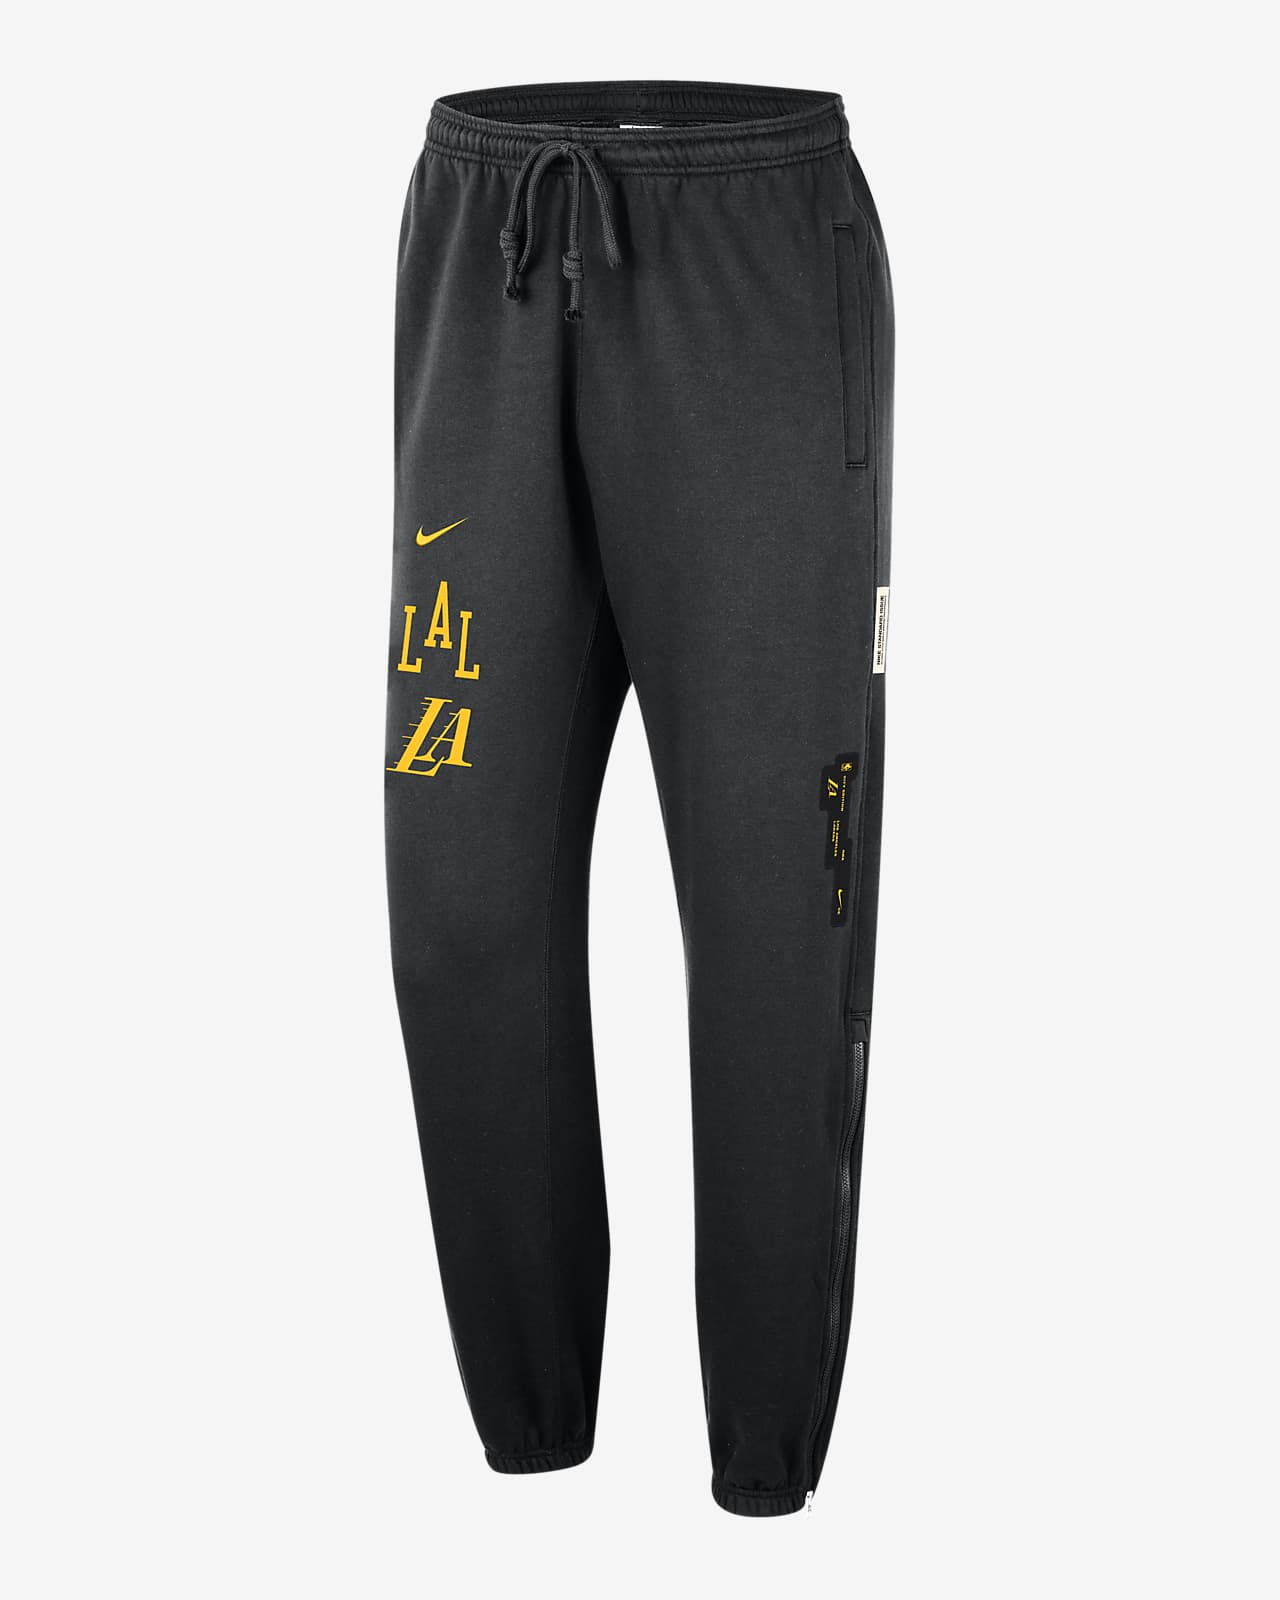 Los Angeles Lakers Standard Issue City Edition Men's Nike NBA Courtside Trousers